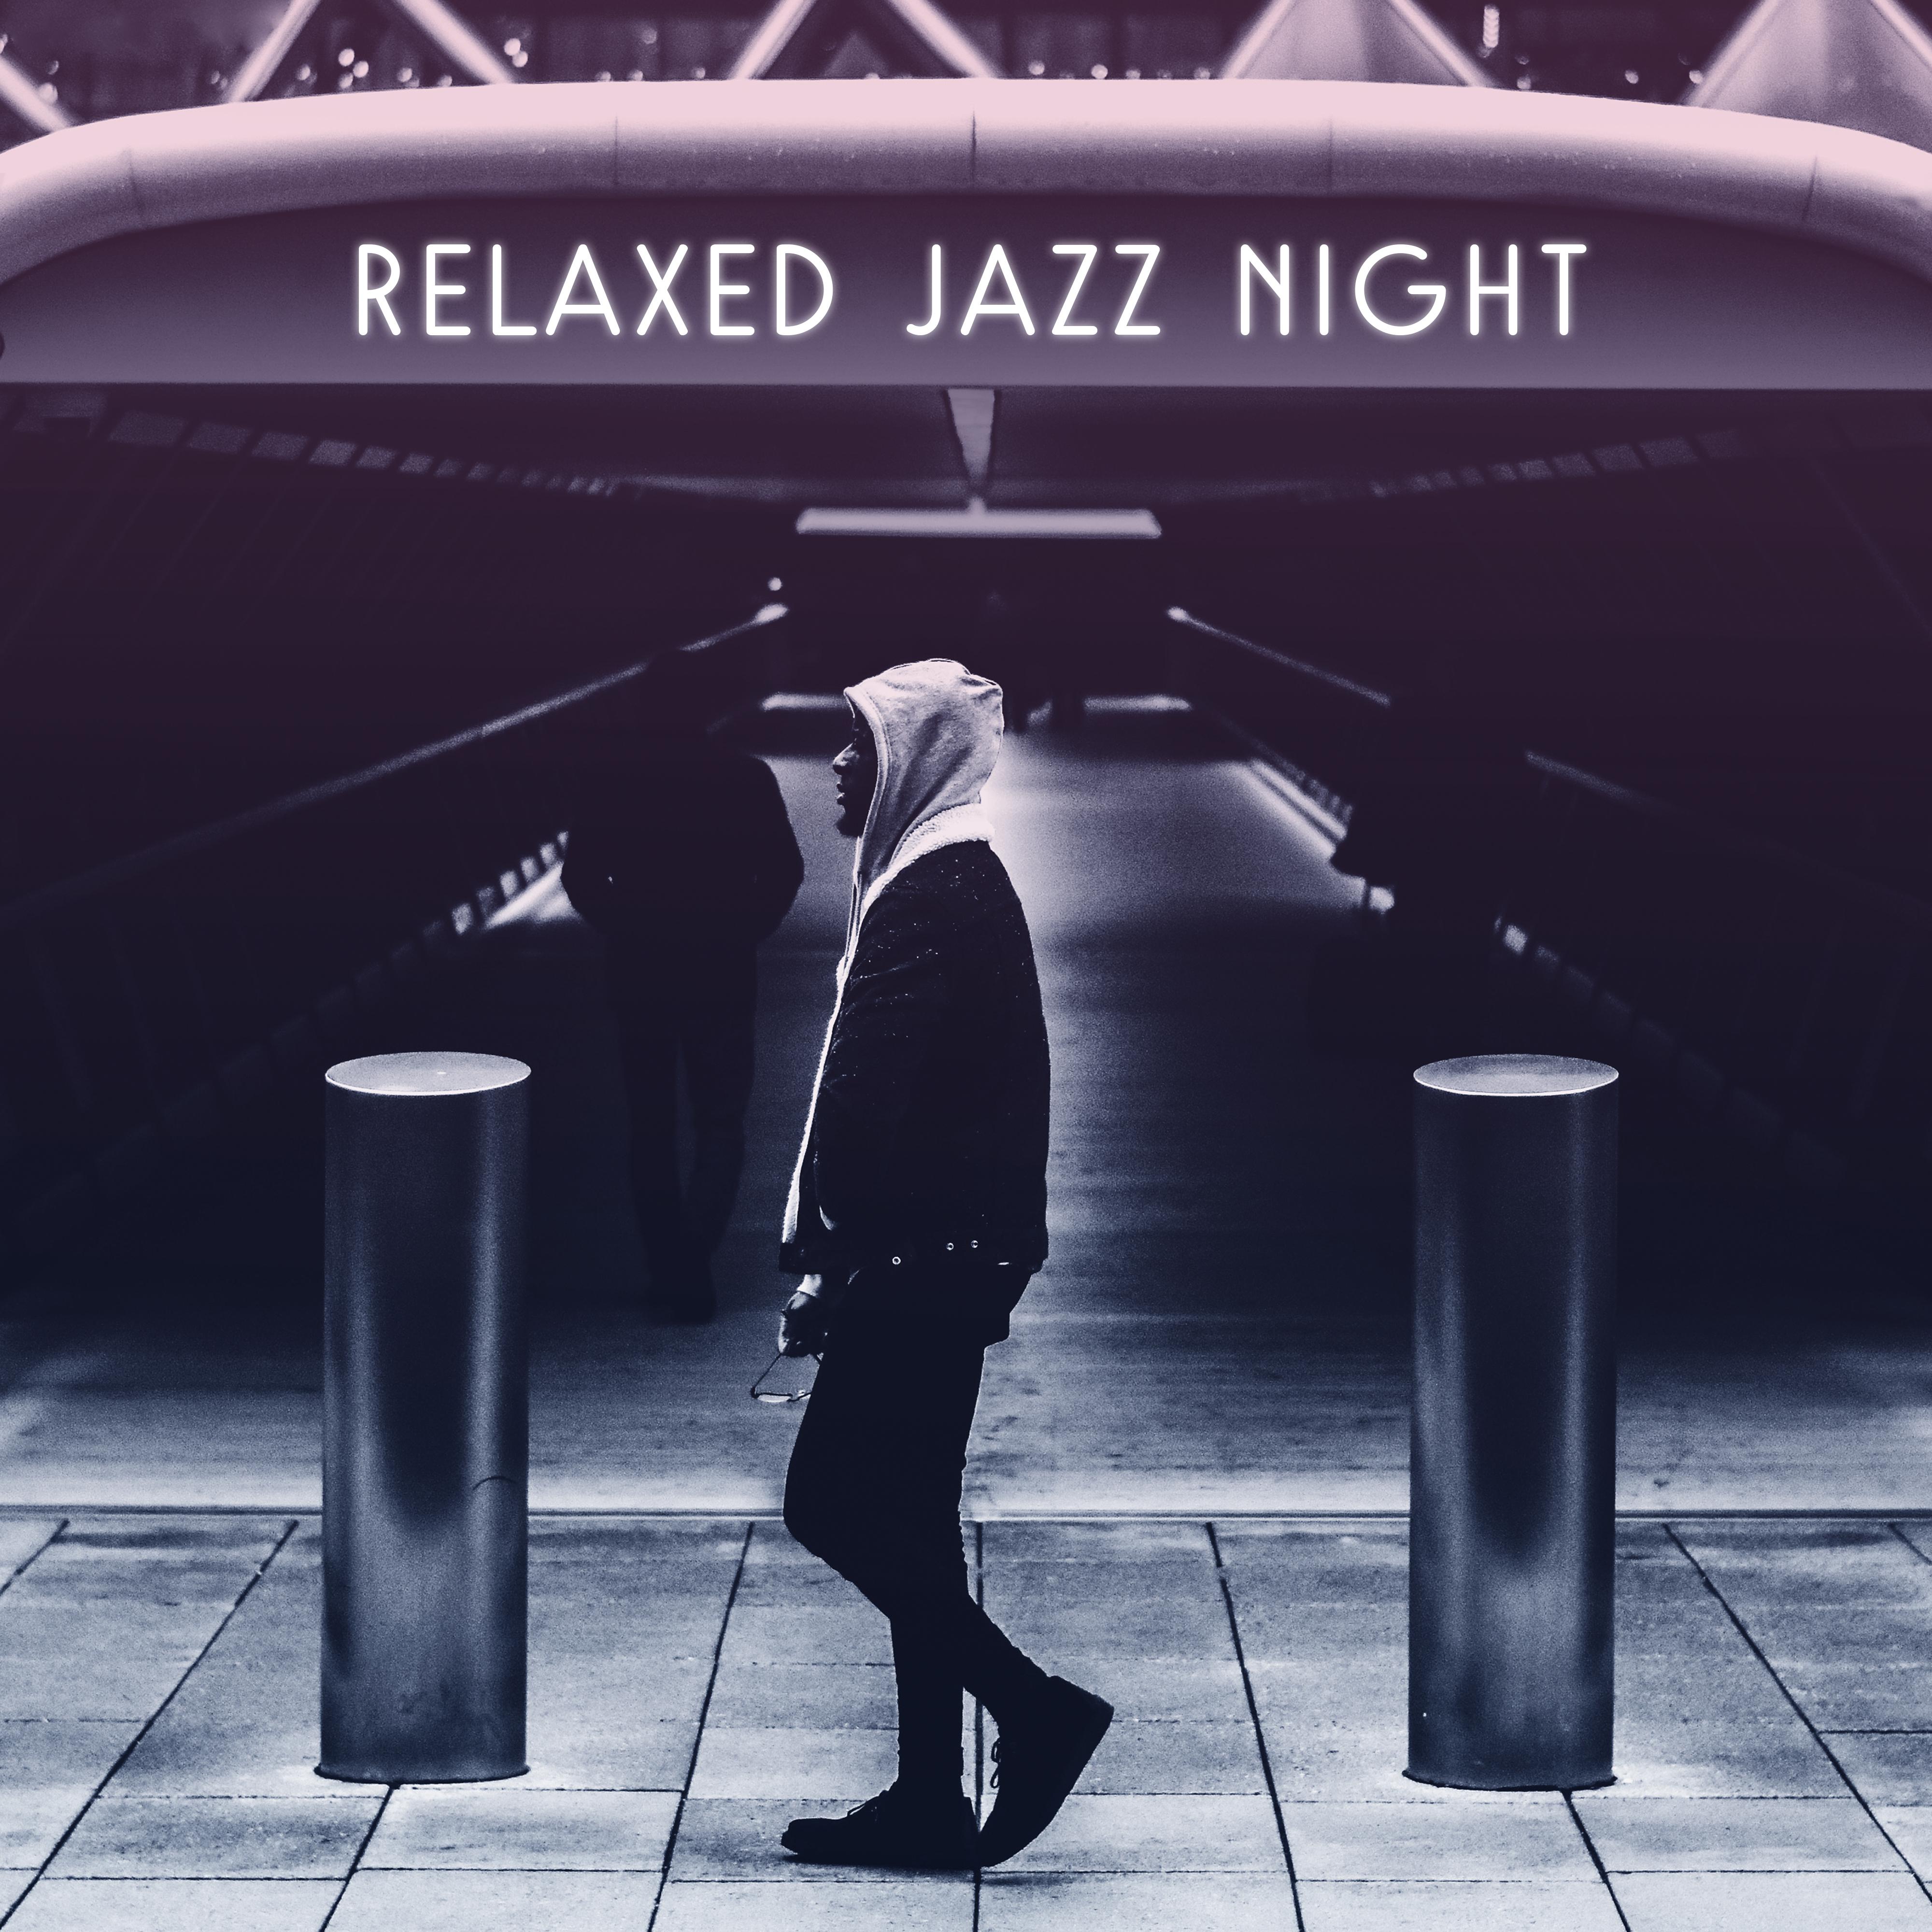 Relaxed Jazz Night  Easy Listening Piano Music, Jazz for Cocktail Party, Calming Evening at Home